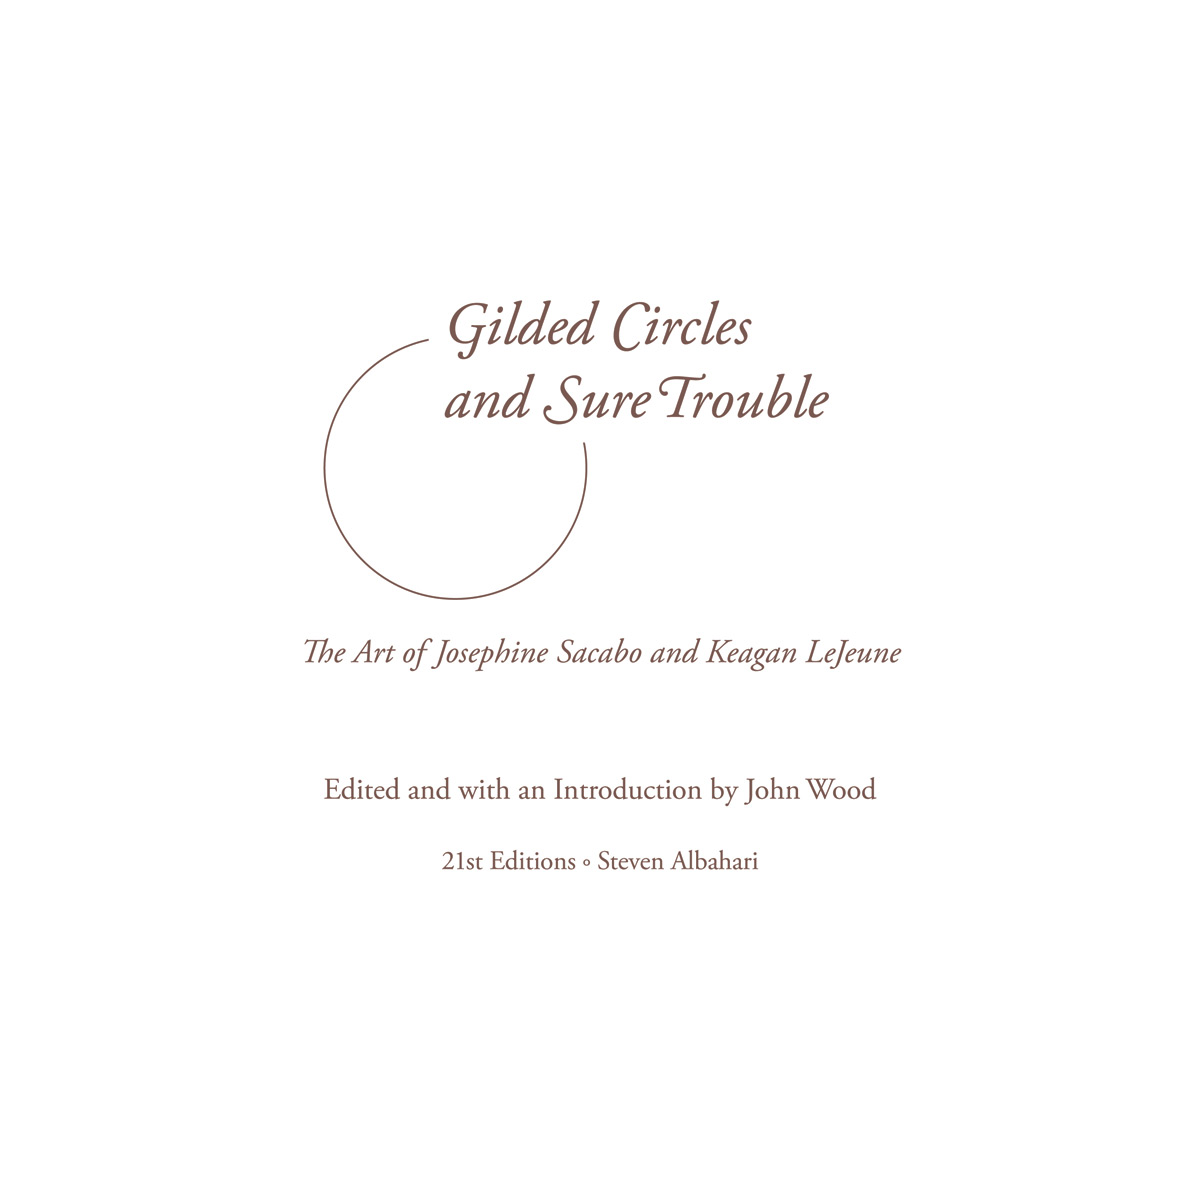 Keagan LeJeune, Gilded Circles and Sure Trouble